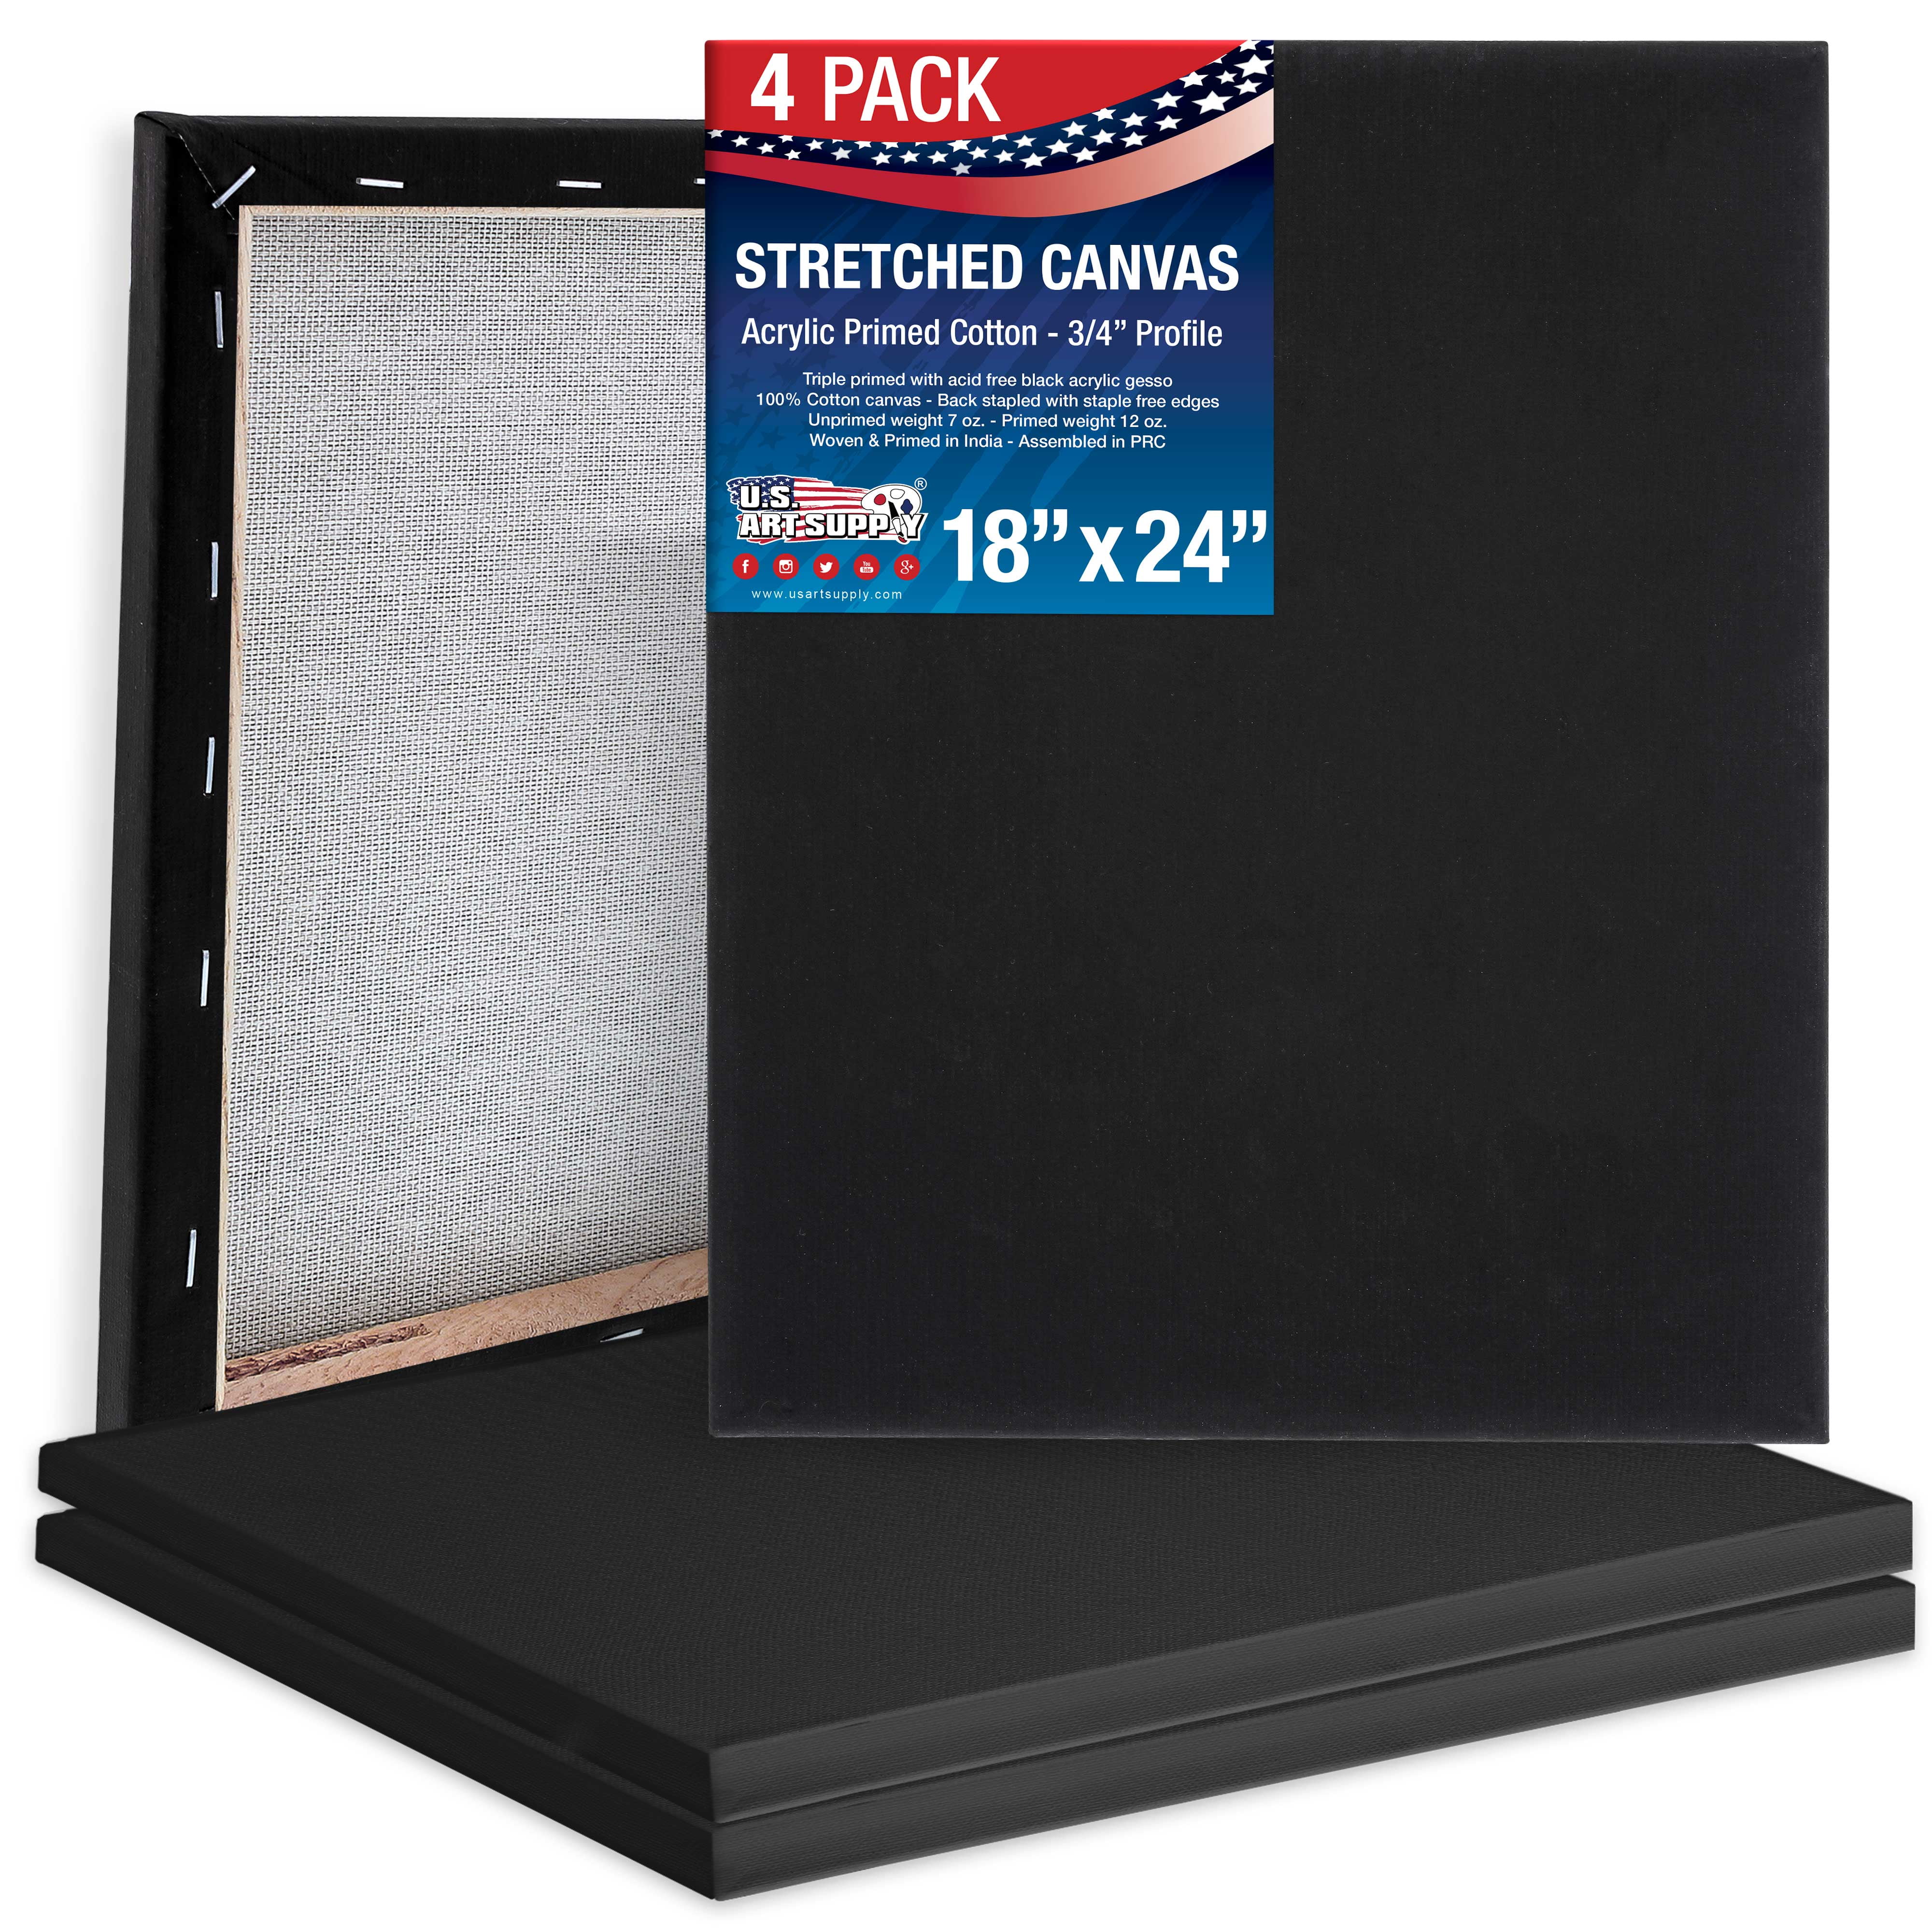 PHOENIX Black Stretched Canvas, 10x10 Inch/4 Pack - 3/4 Inch Profile, 8 Oz  Quadruple Gesso Primed 100% Cotton Blank Black Canvases for Acrylic, Oil